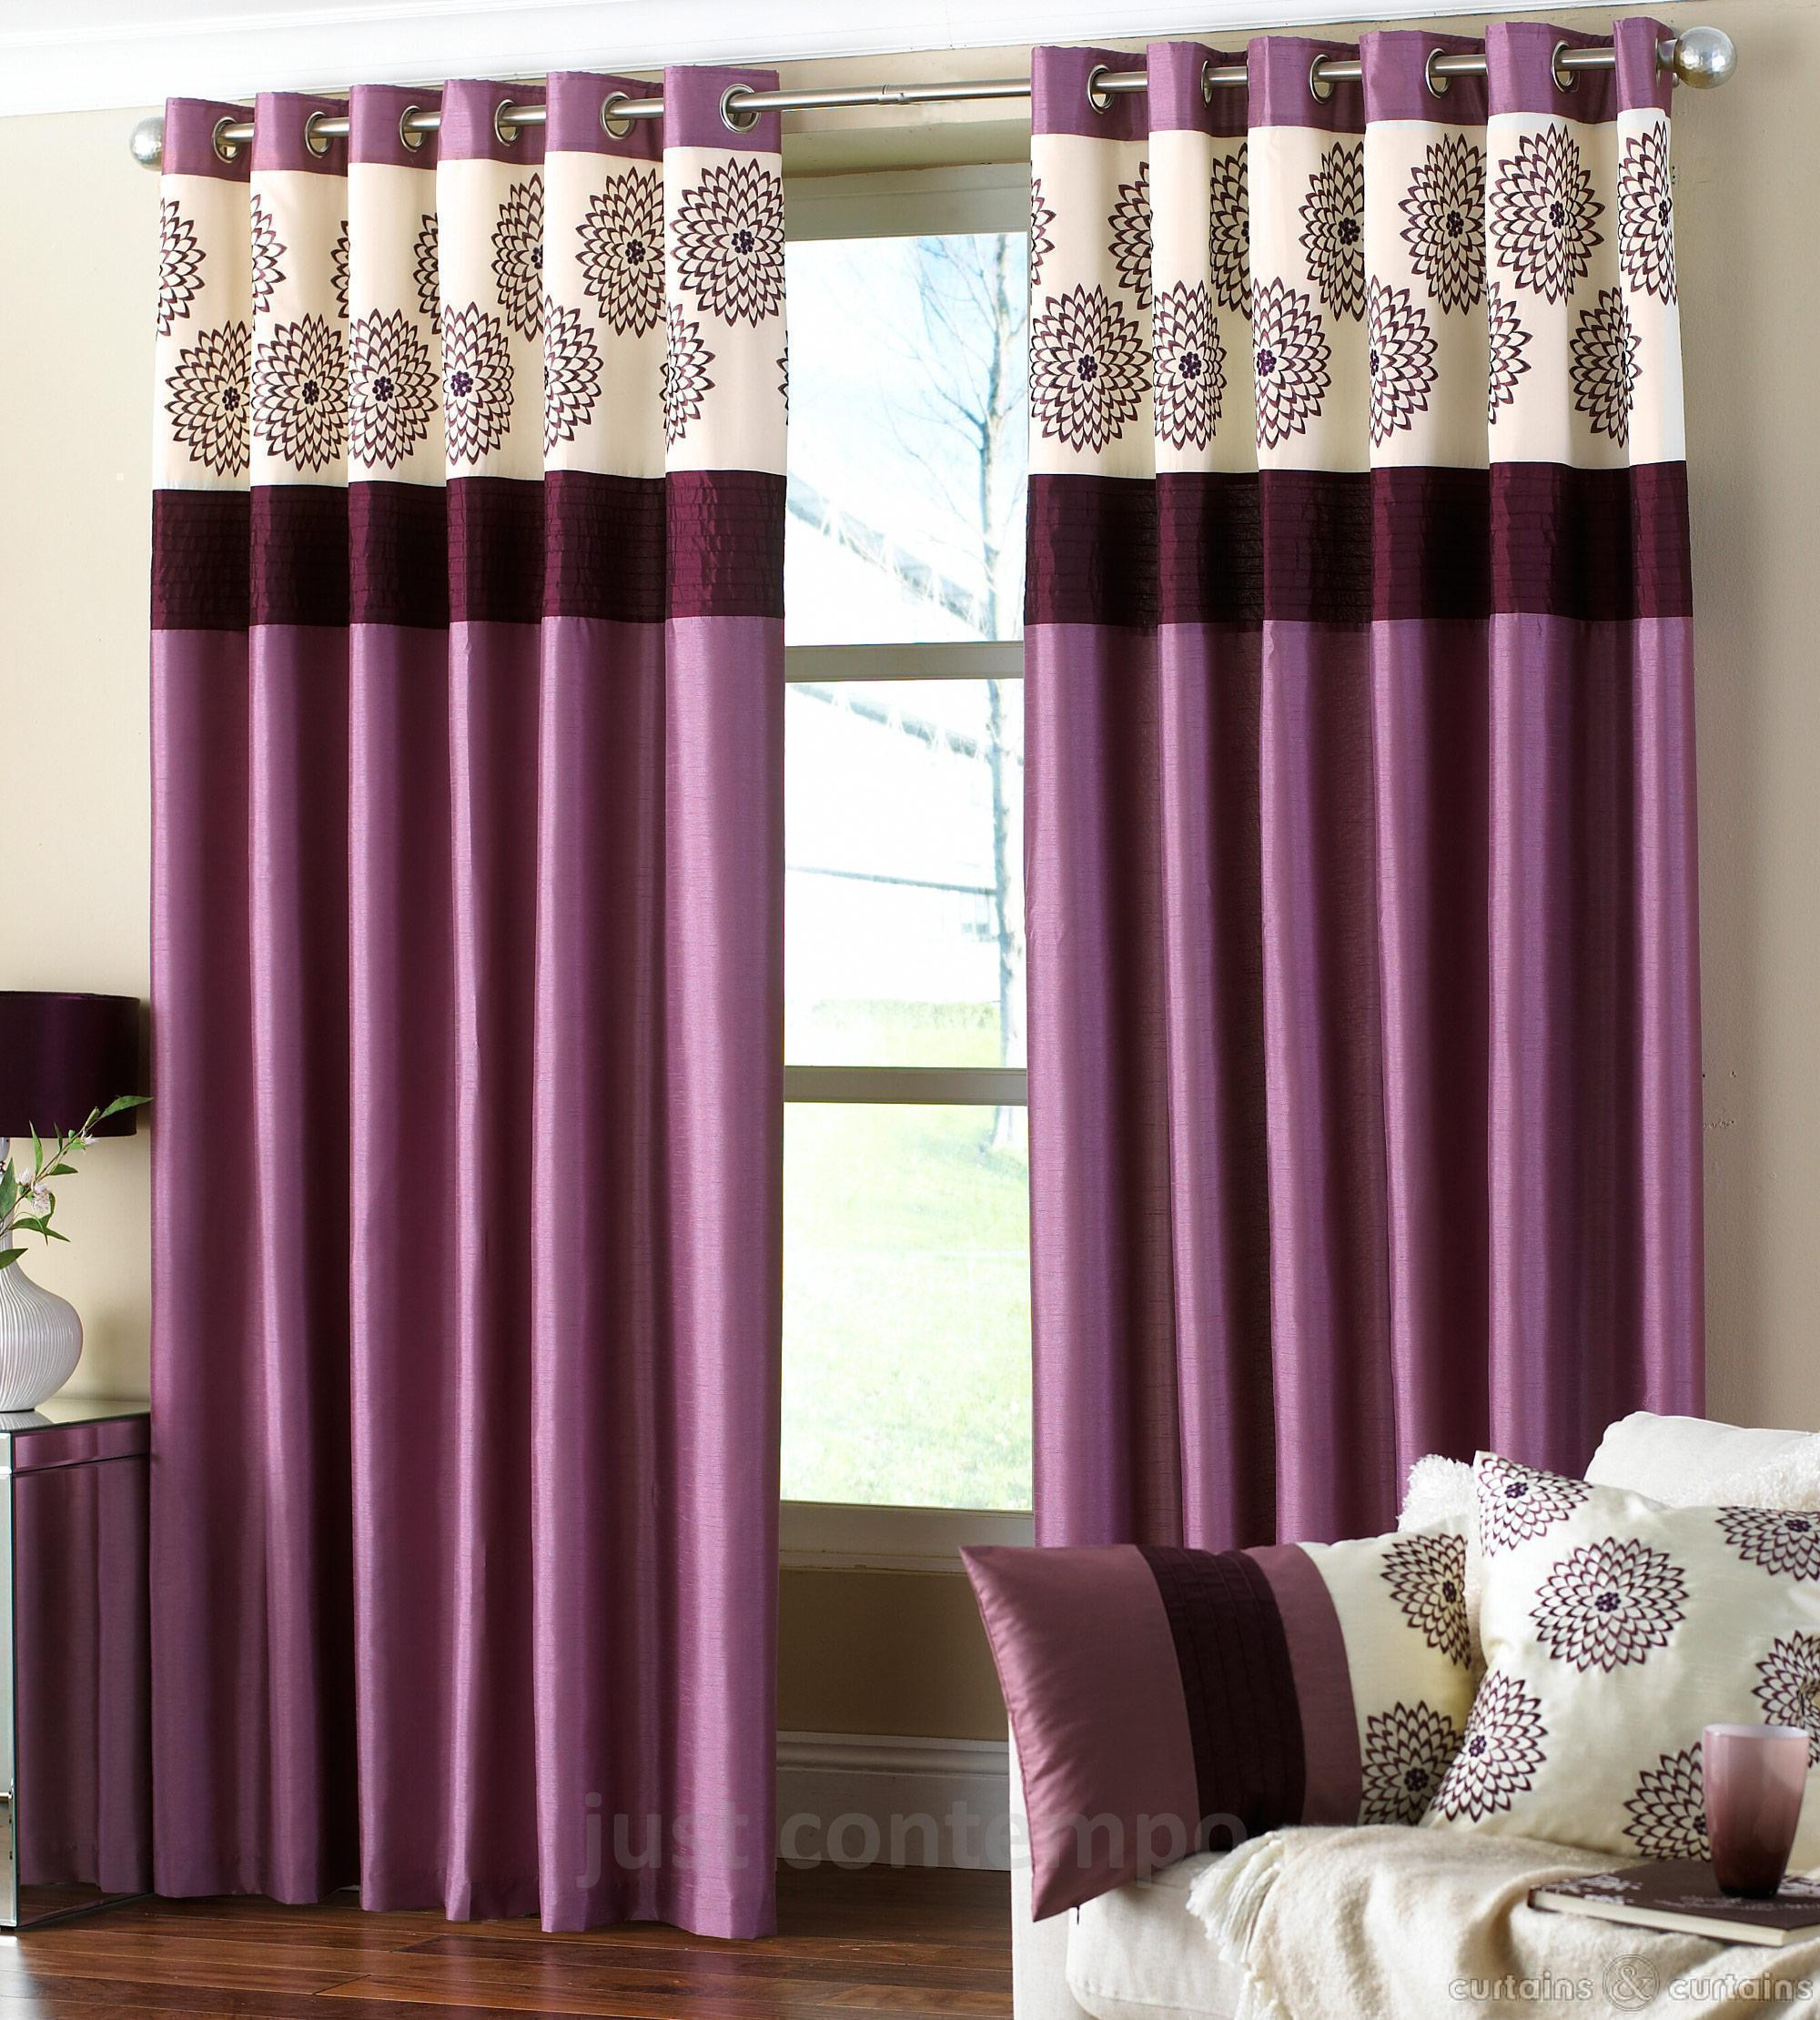 Living Room Curtain Ideas Modern
 Awesome Living Room Curtains Designs Amaza Design